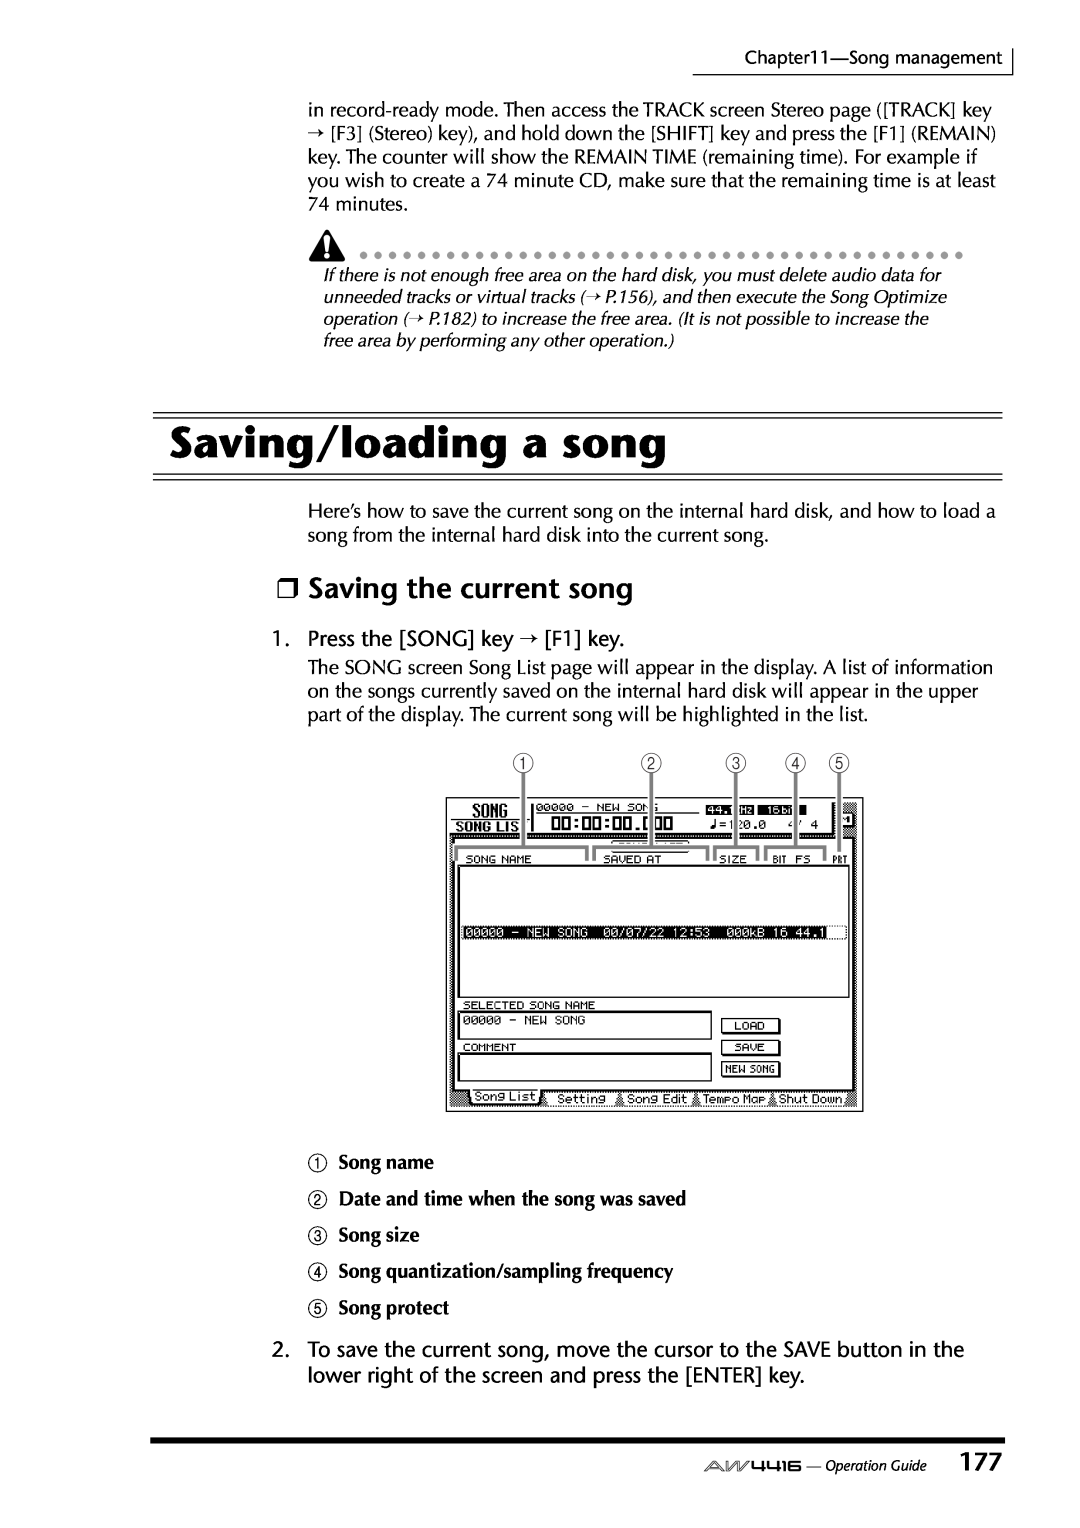 Yamaha AW4416 manual Saving/loading a song, Saving the current song, 1Song name BDate and time when the song was saved 